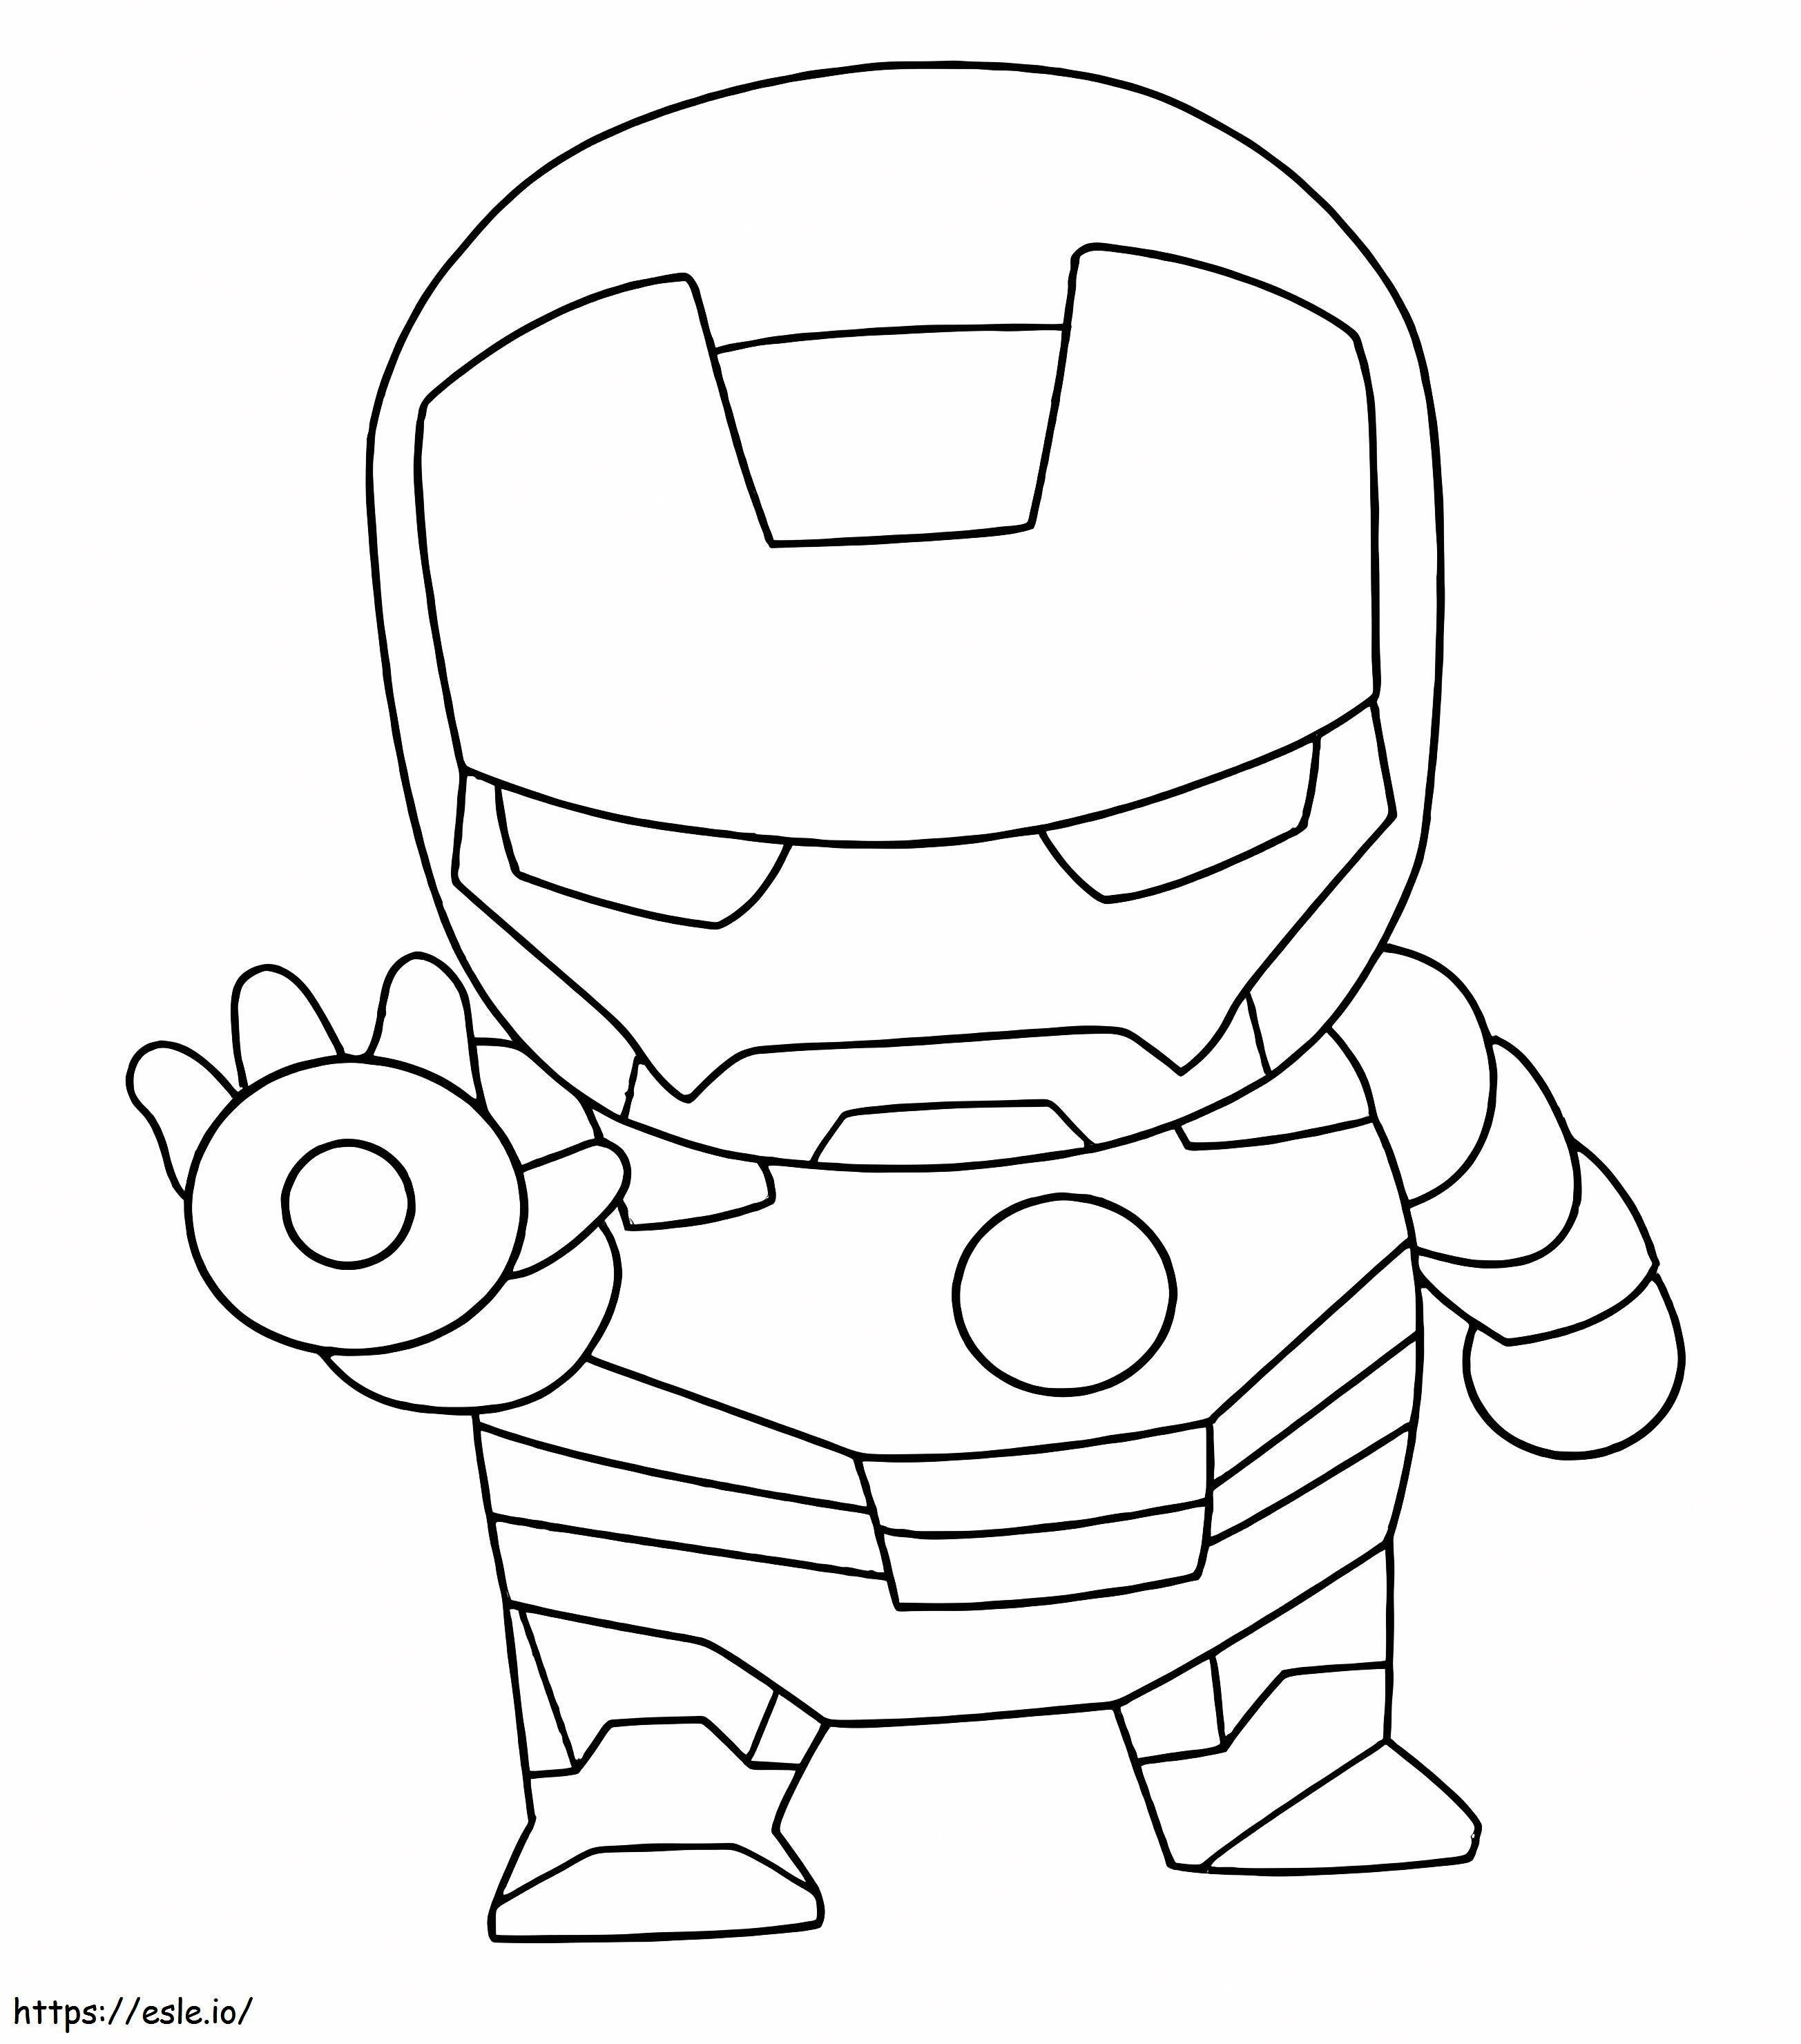 1560587933 Cute Iron Man A4 coloring page